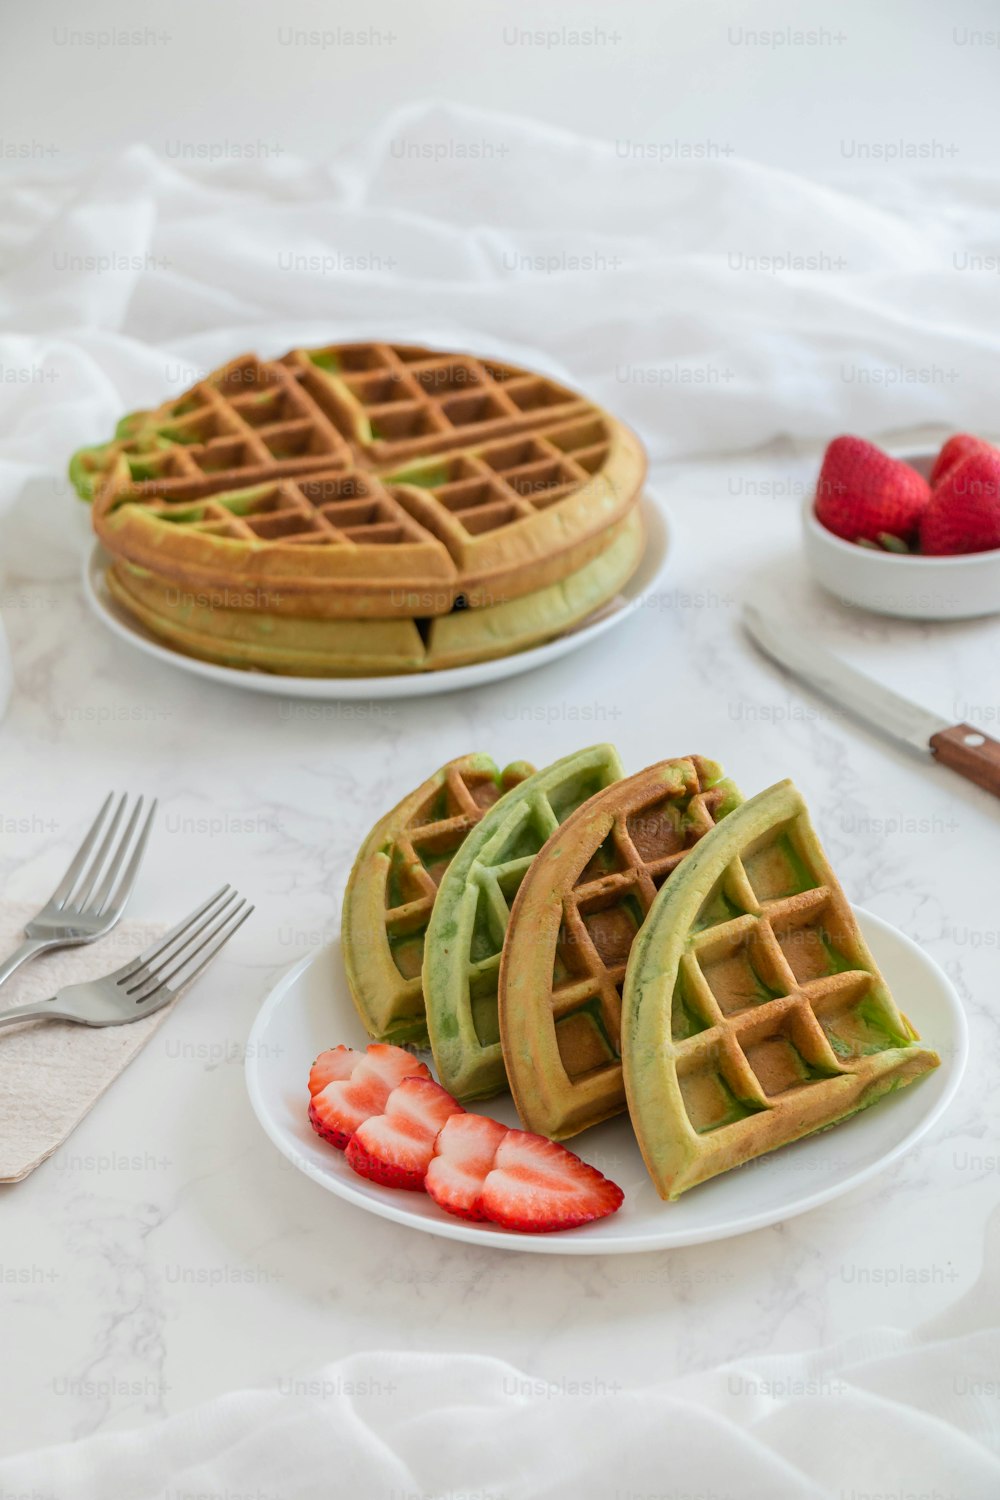 a plate of waffles and strawberries on a table